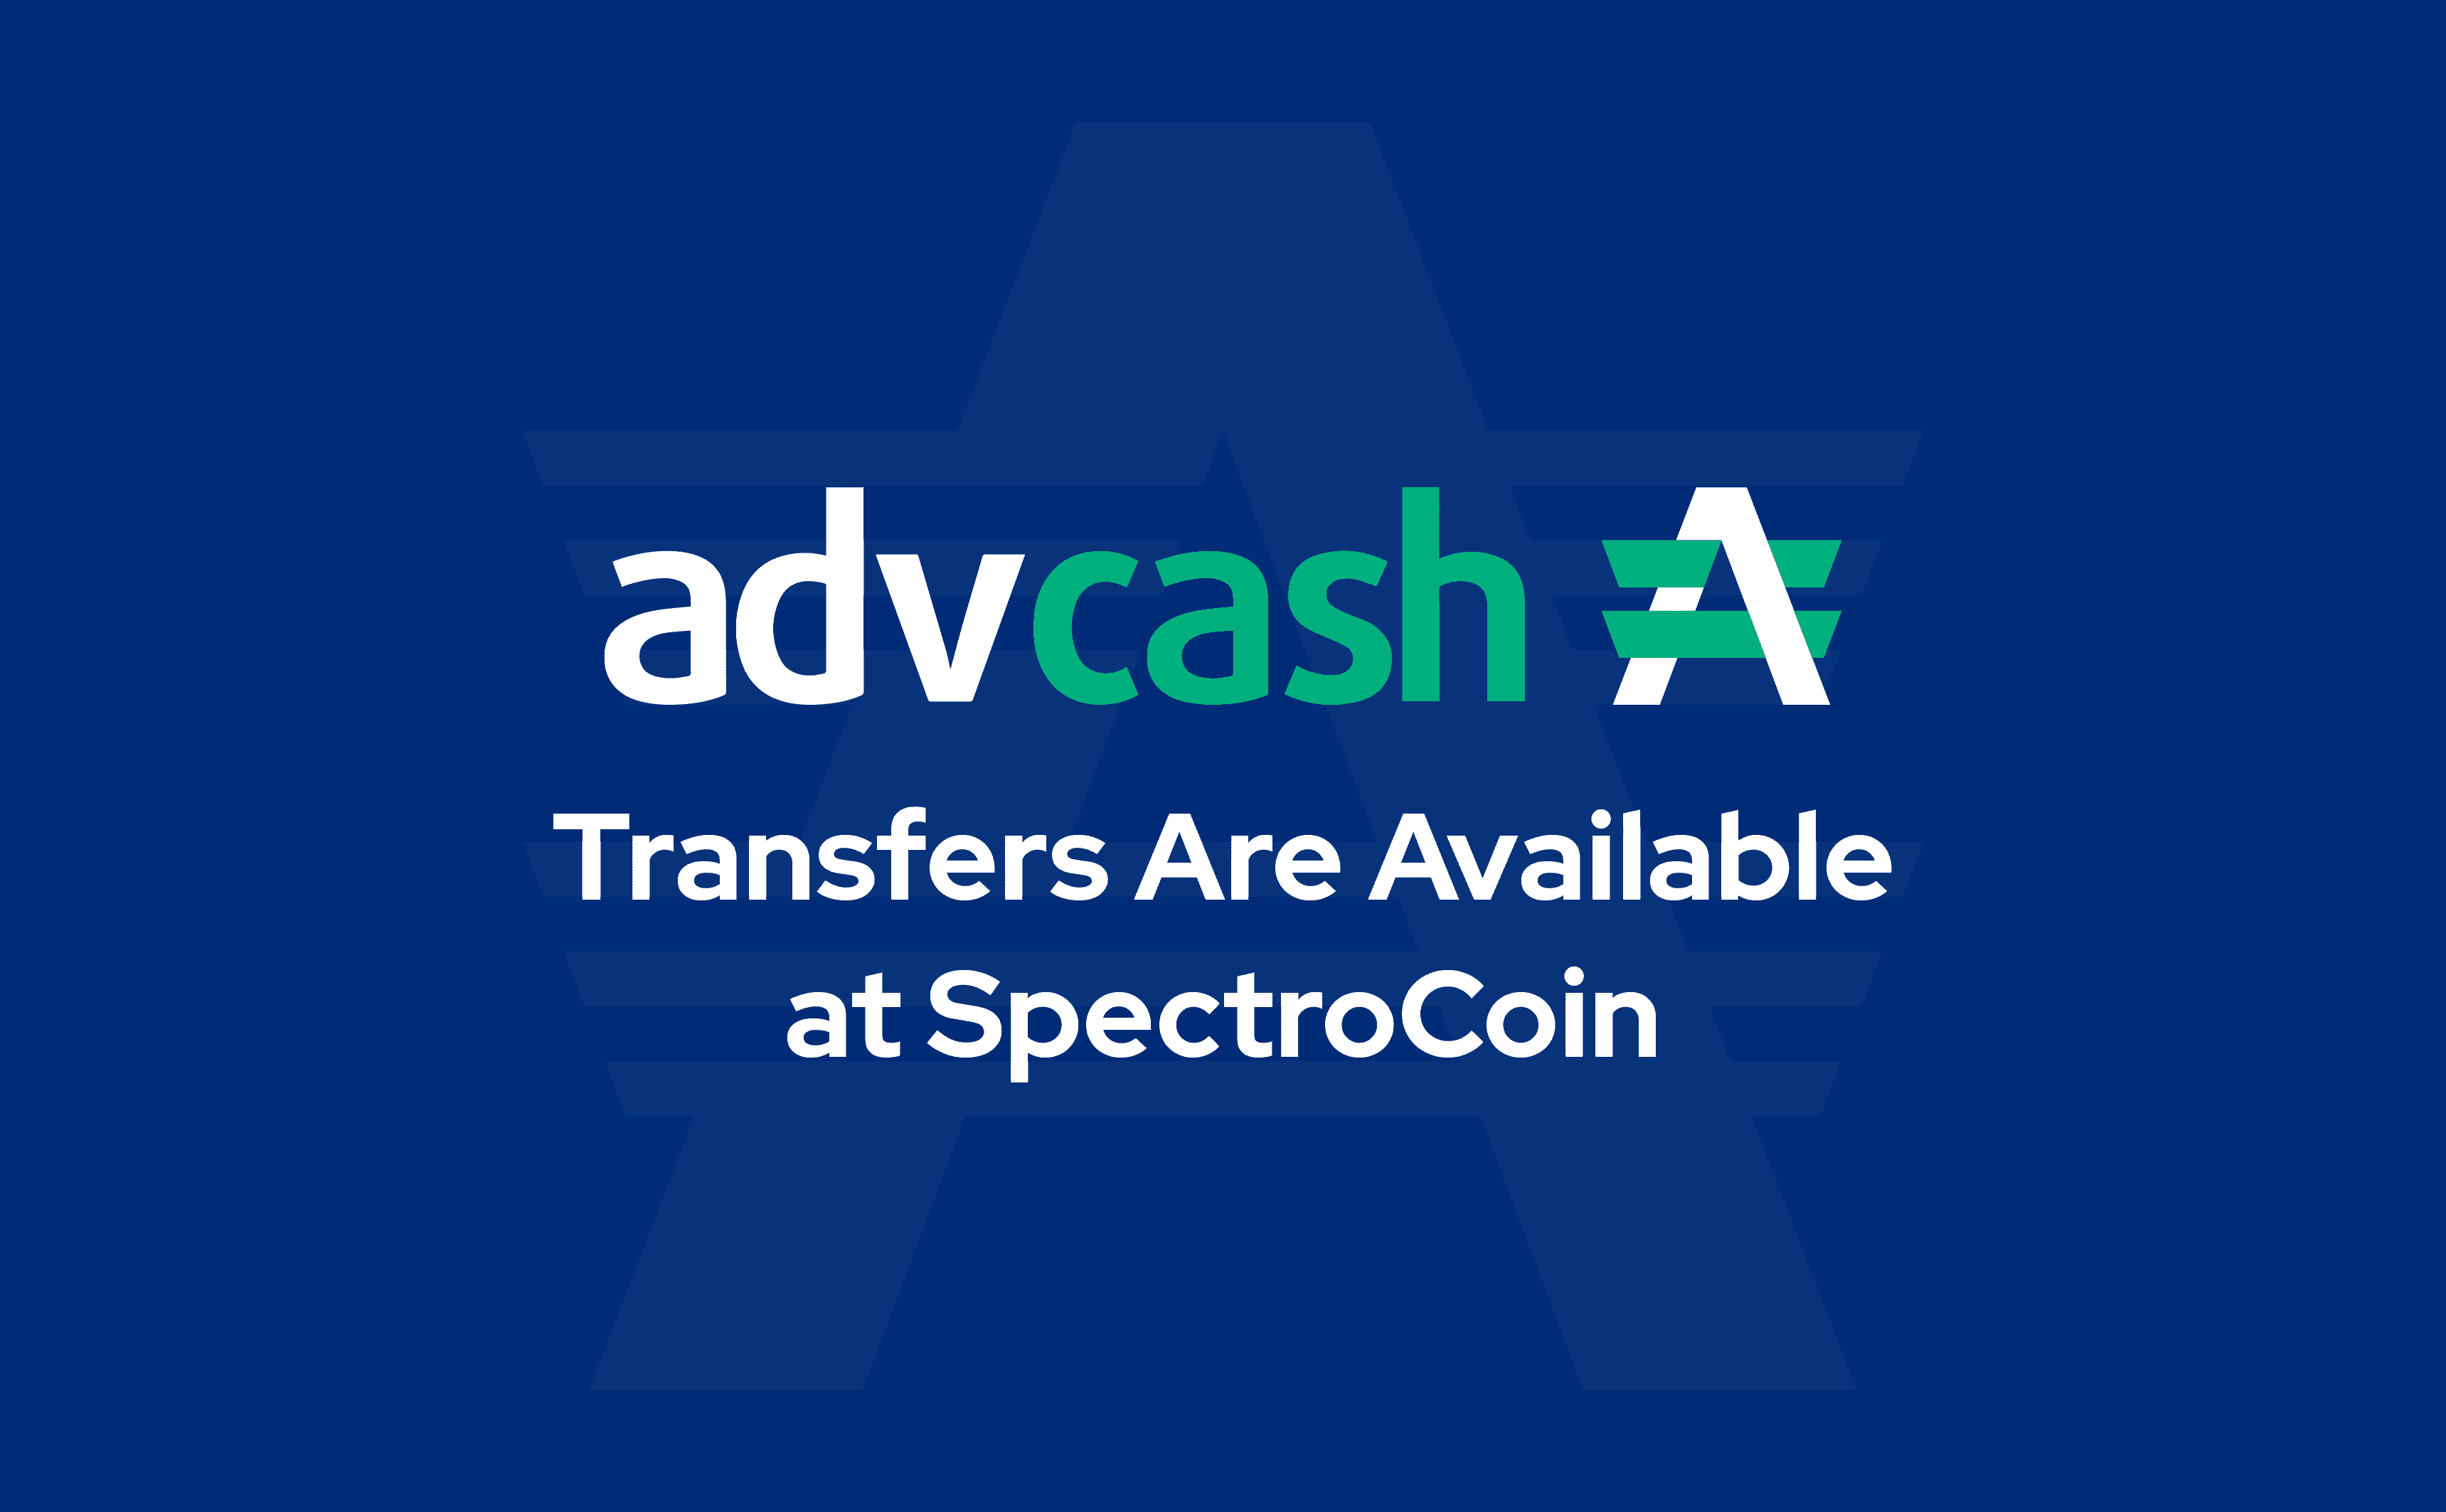 You can already buy Bitcoin with Advcash at SpectroCoin.